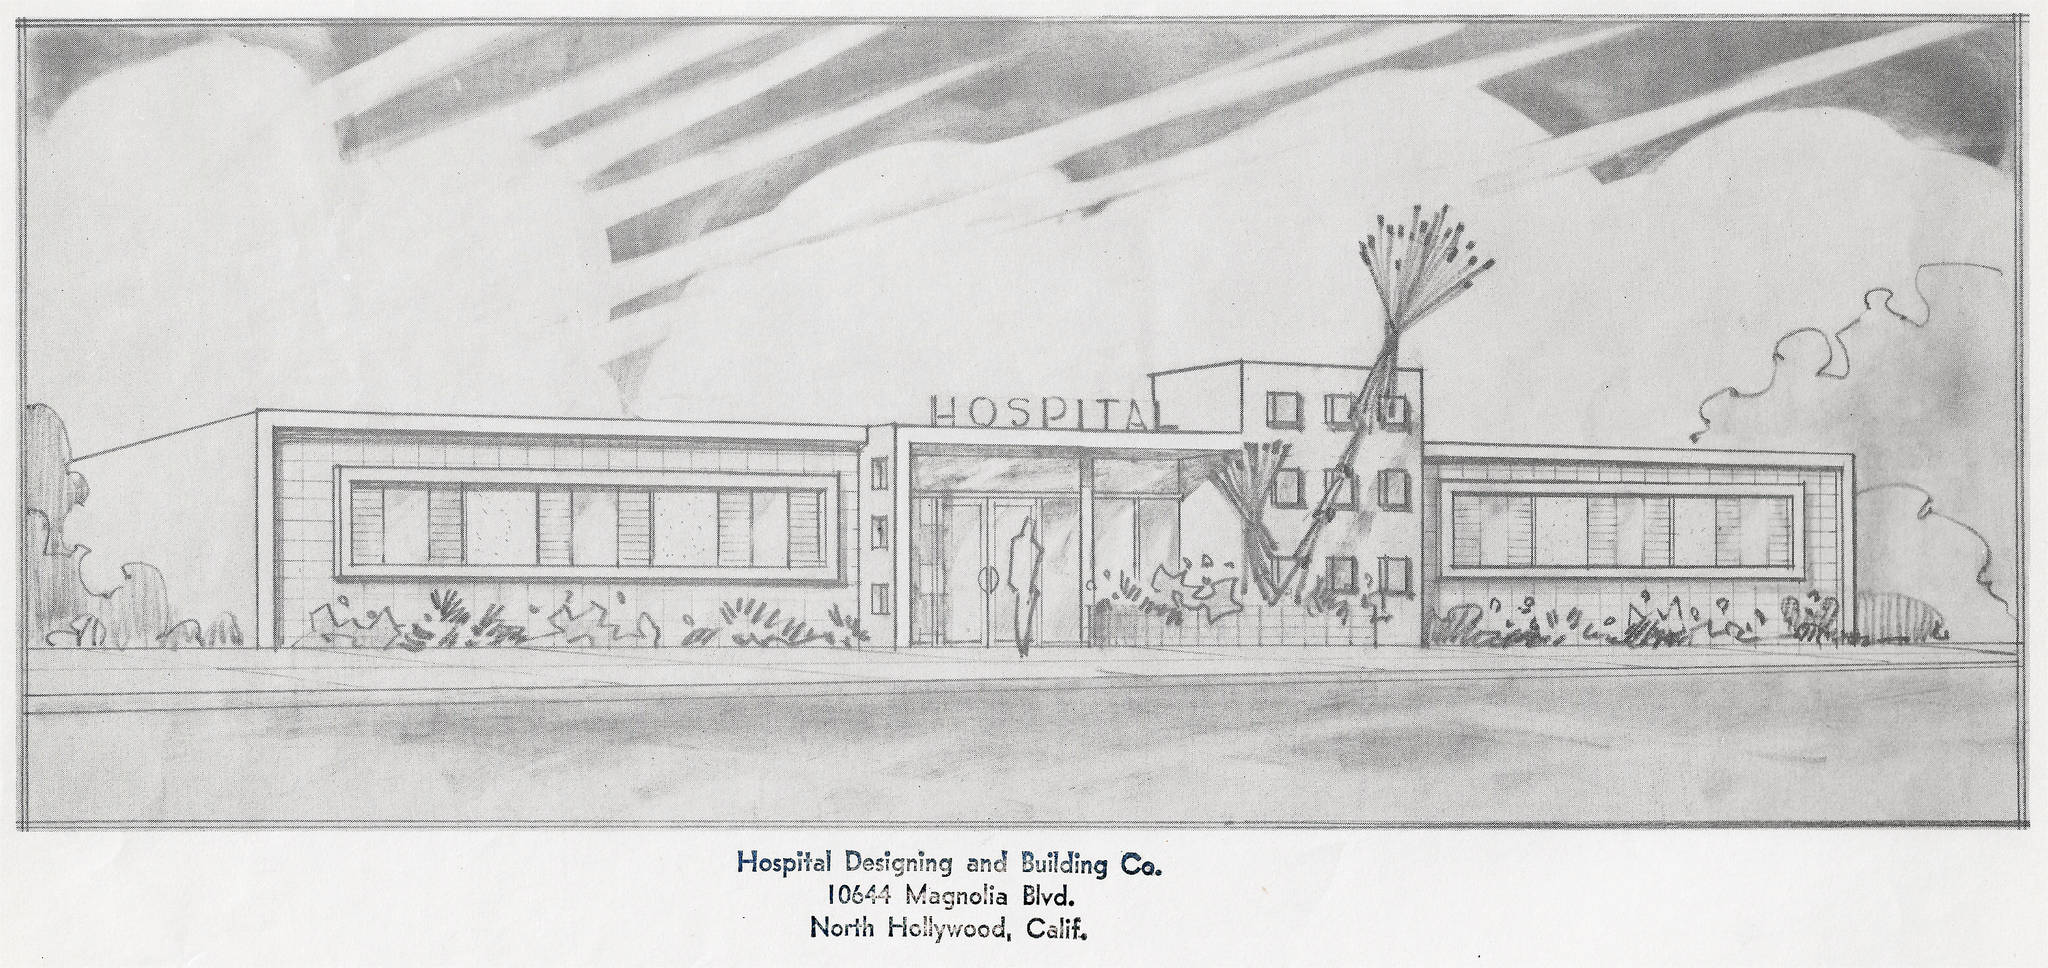 Document courtesy of the Isaak family
This 1963 drawing, based on ideas put forth by Dr. Paul Isaak, provides an early architectural concept for a proposed hospital on the central Kenai Peninsula.